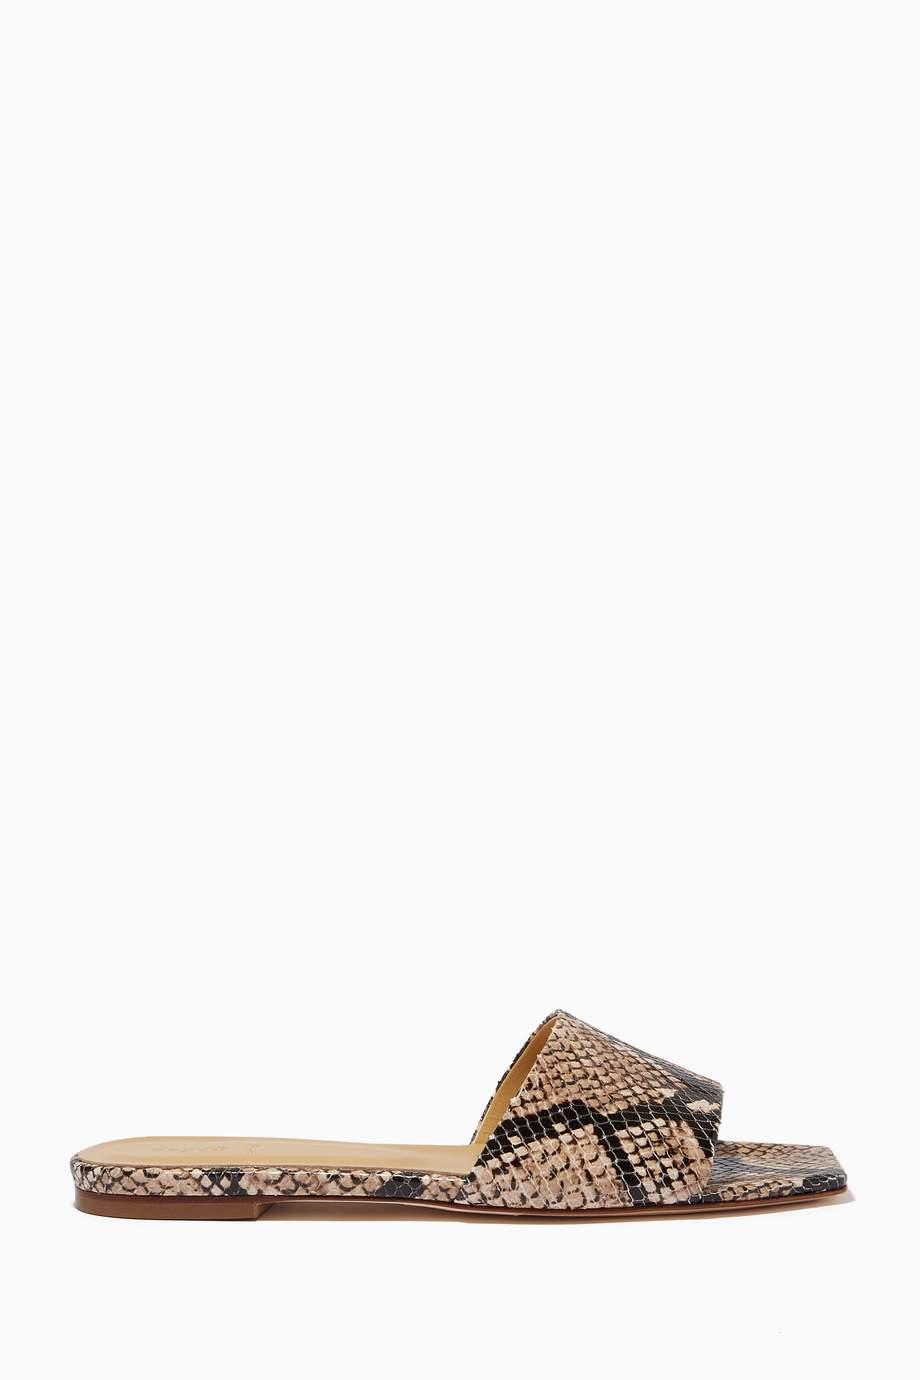 Shop Aeyde Neutral Anna Flat Sandals in Python Print Calf Leather for ...